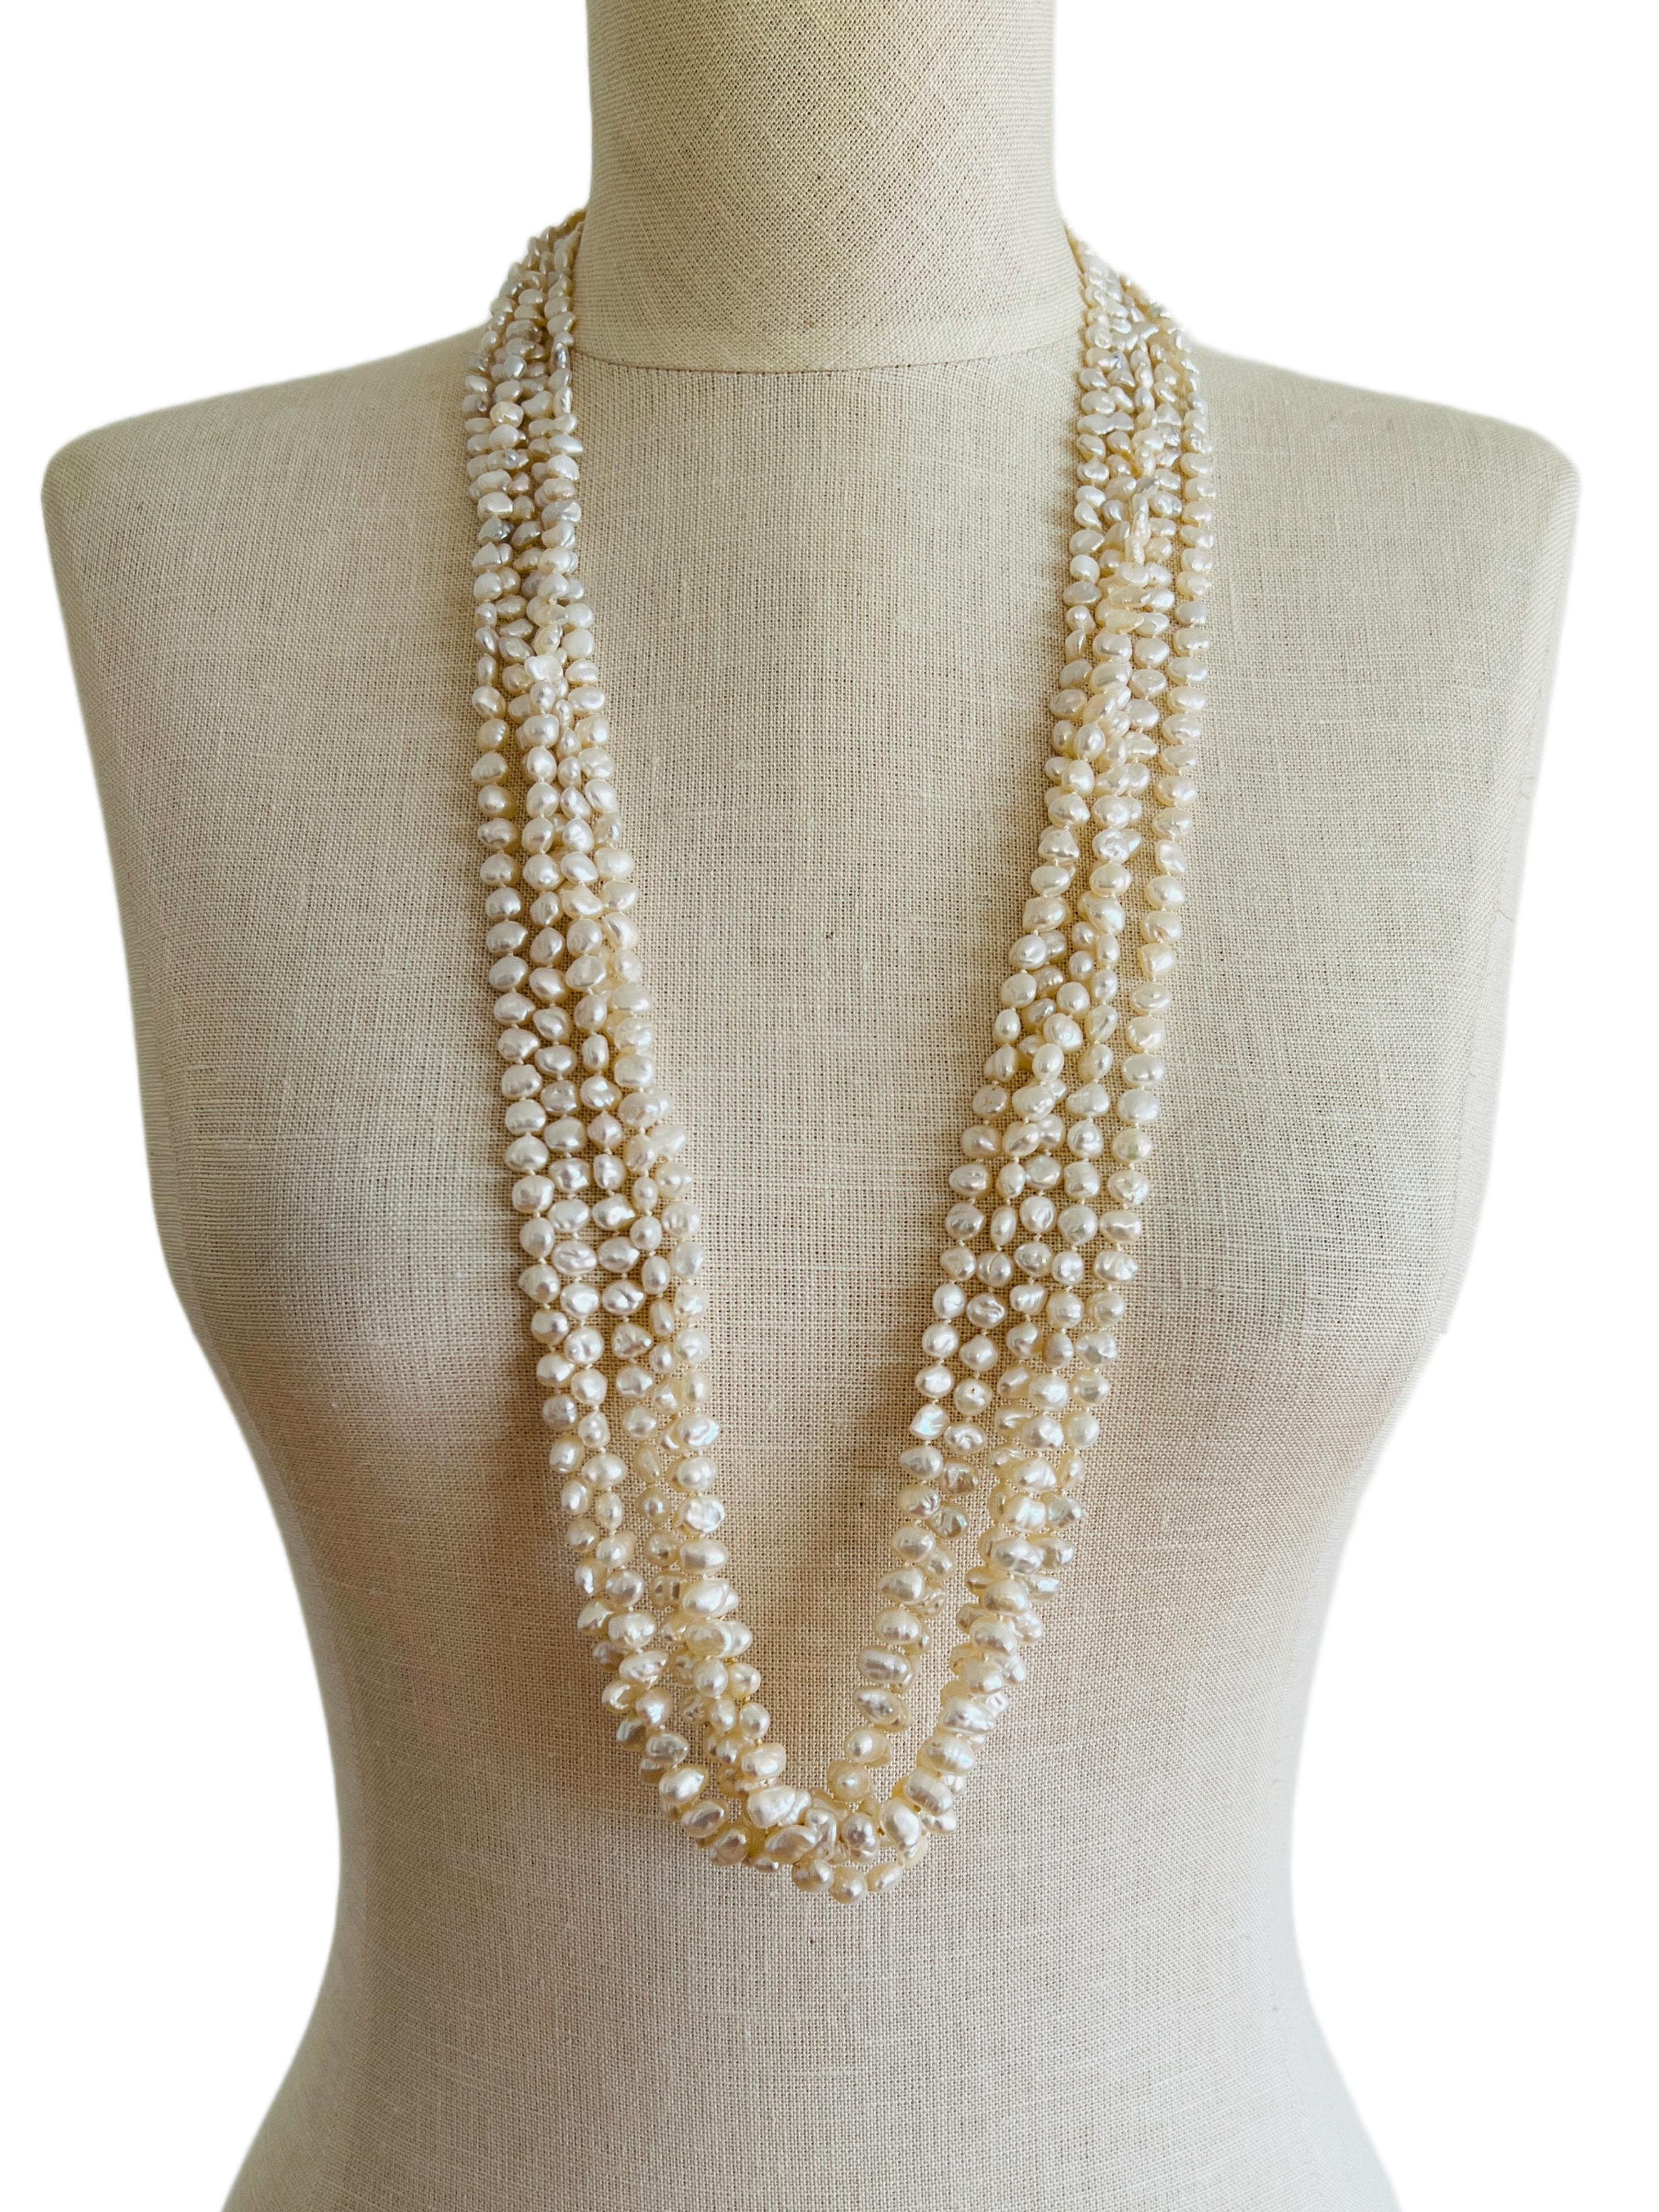 14k Keishi Freshwater Cultured Pearl Choker 5 Strand Torsade Necklace Earrings In Good Condition For Sale In Sausalito, CA